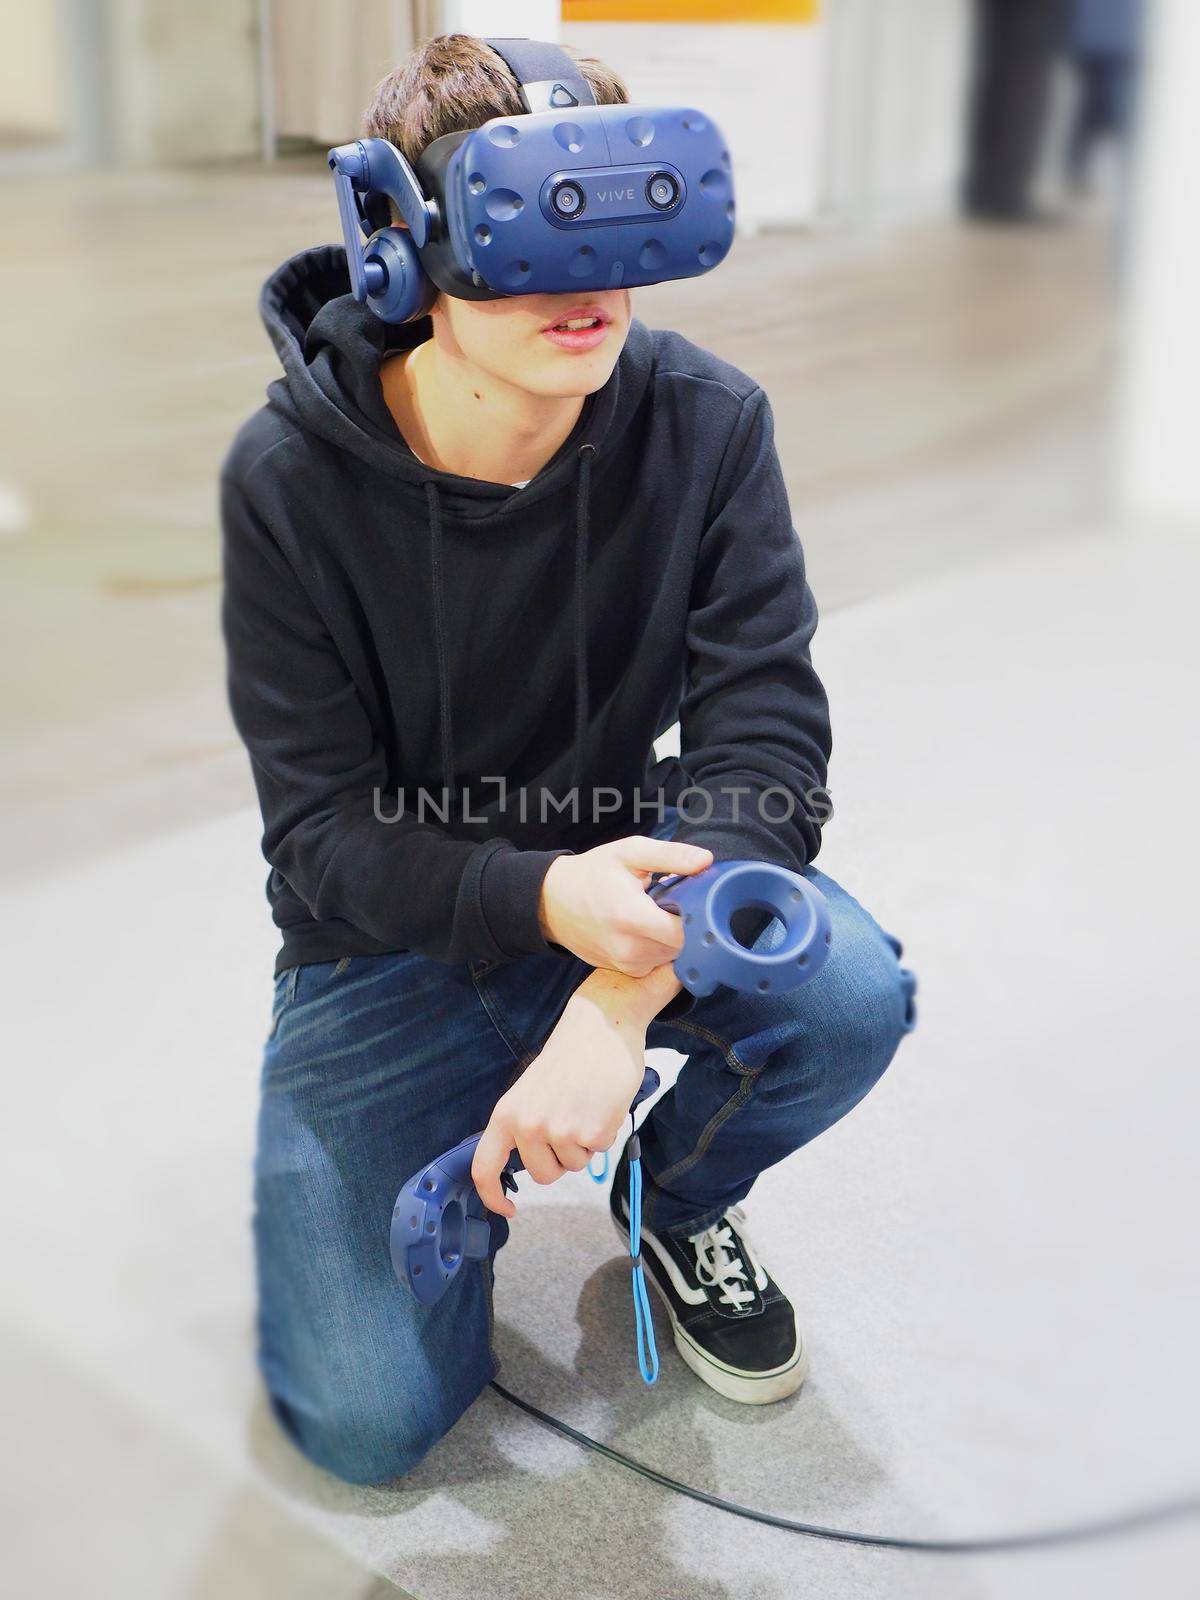 Testing device for virtual reality applied in business and industrial environment Turin Italy February 12 2020